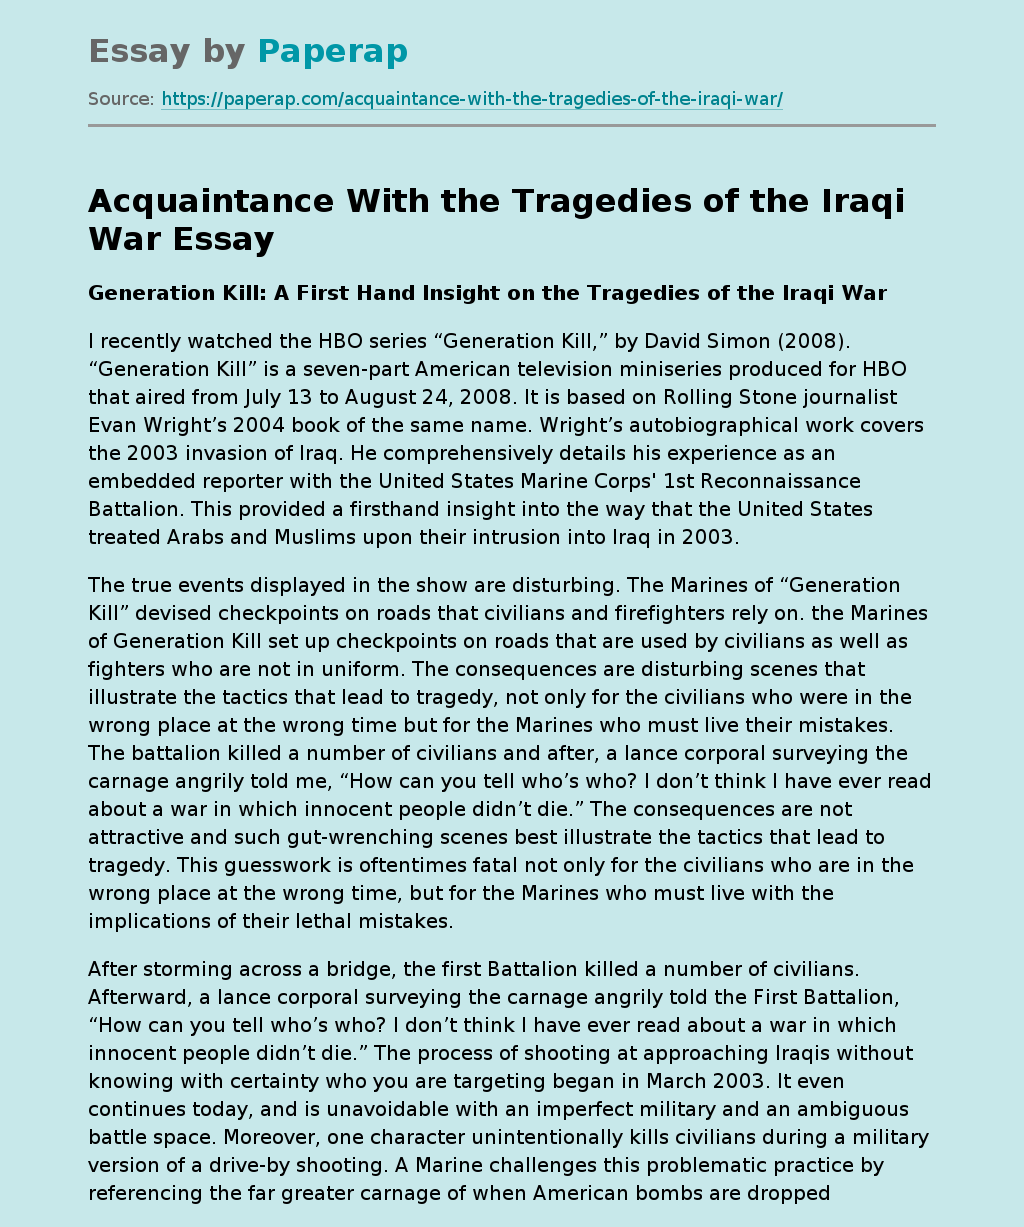 Acquaintance With the Tragedies of the Iraqi War